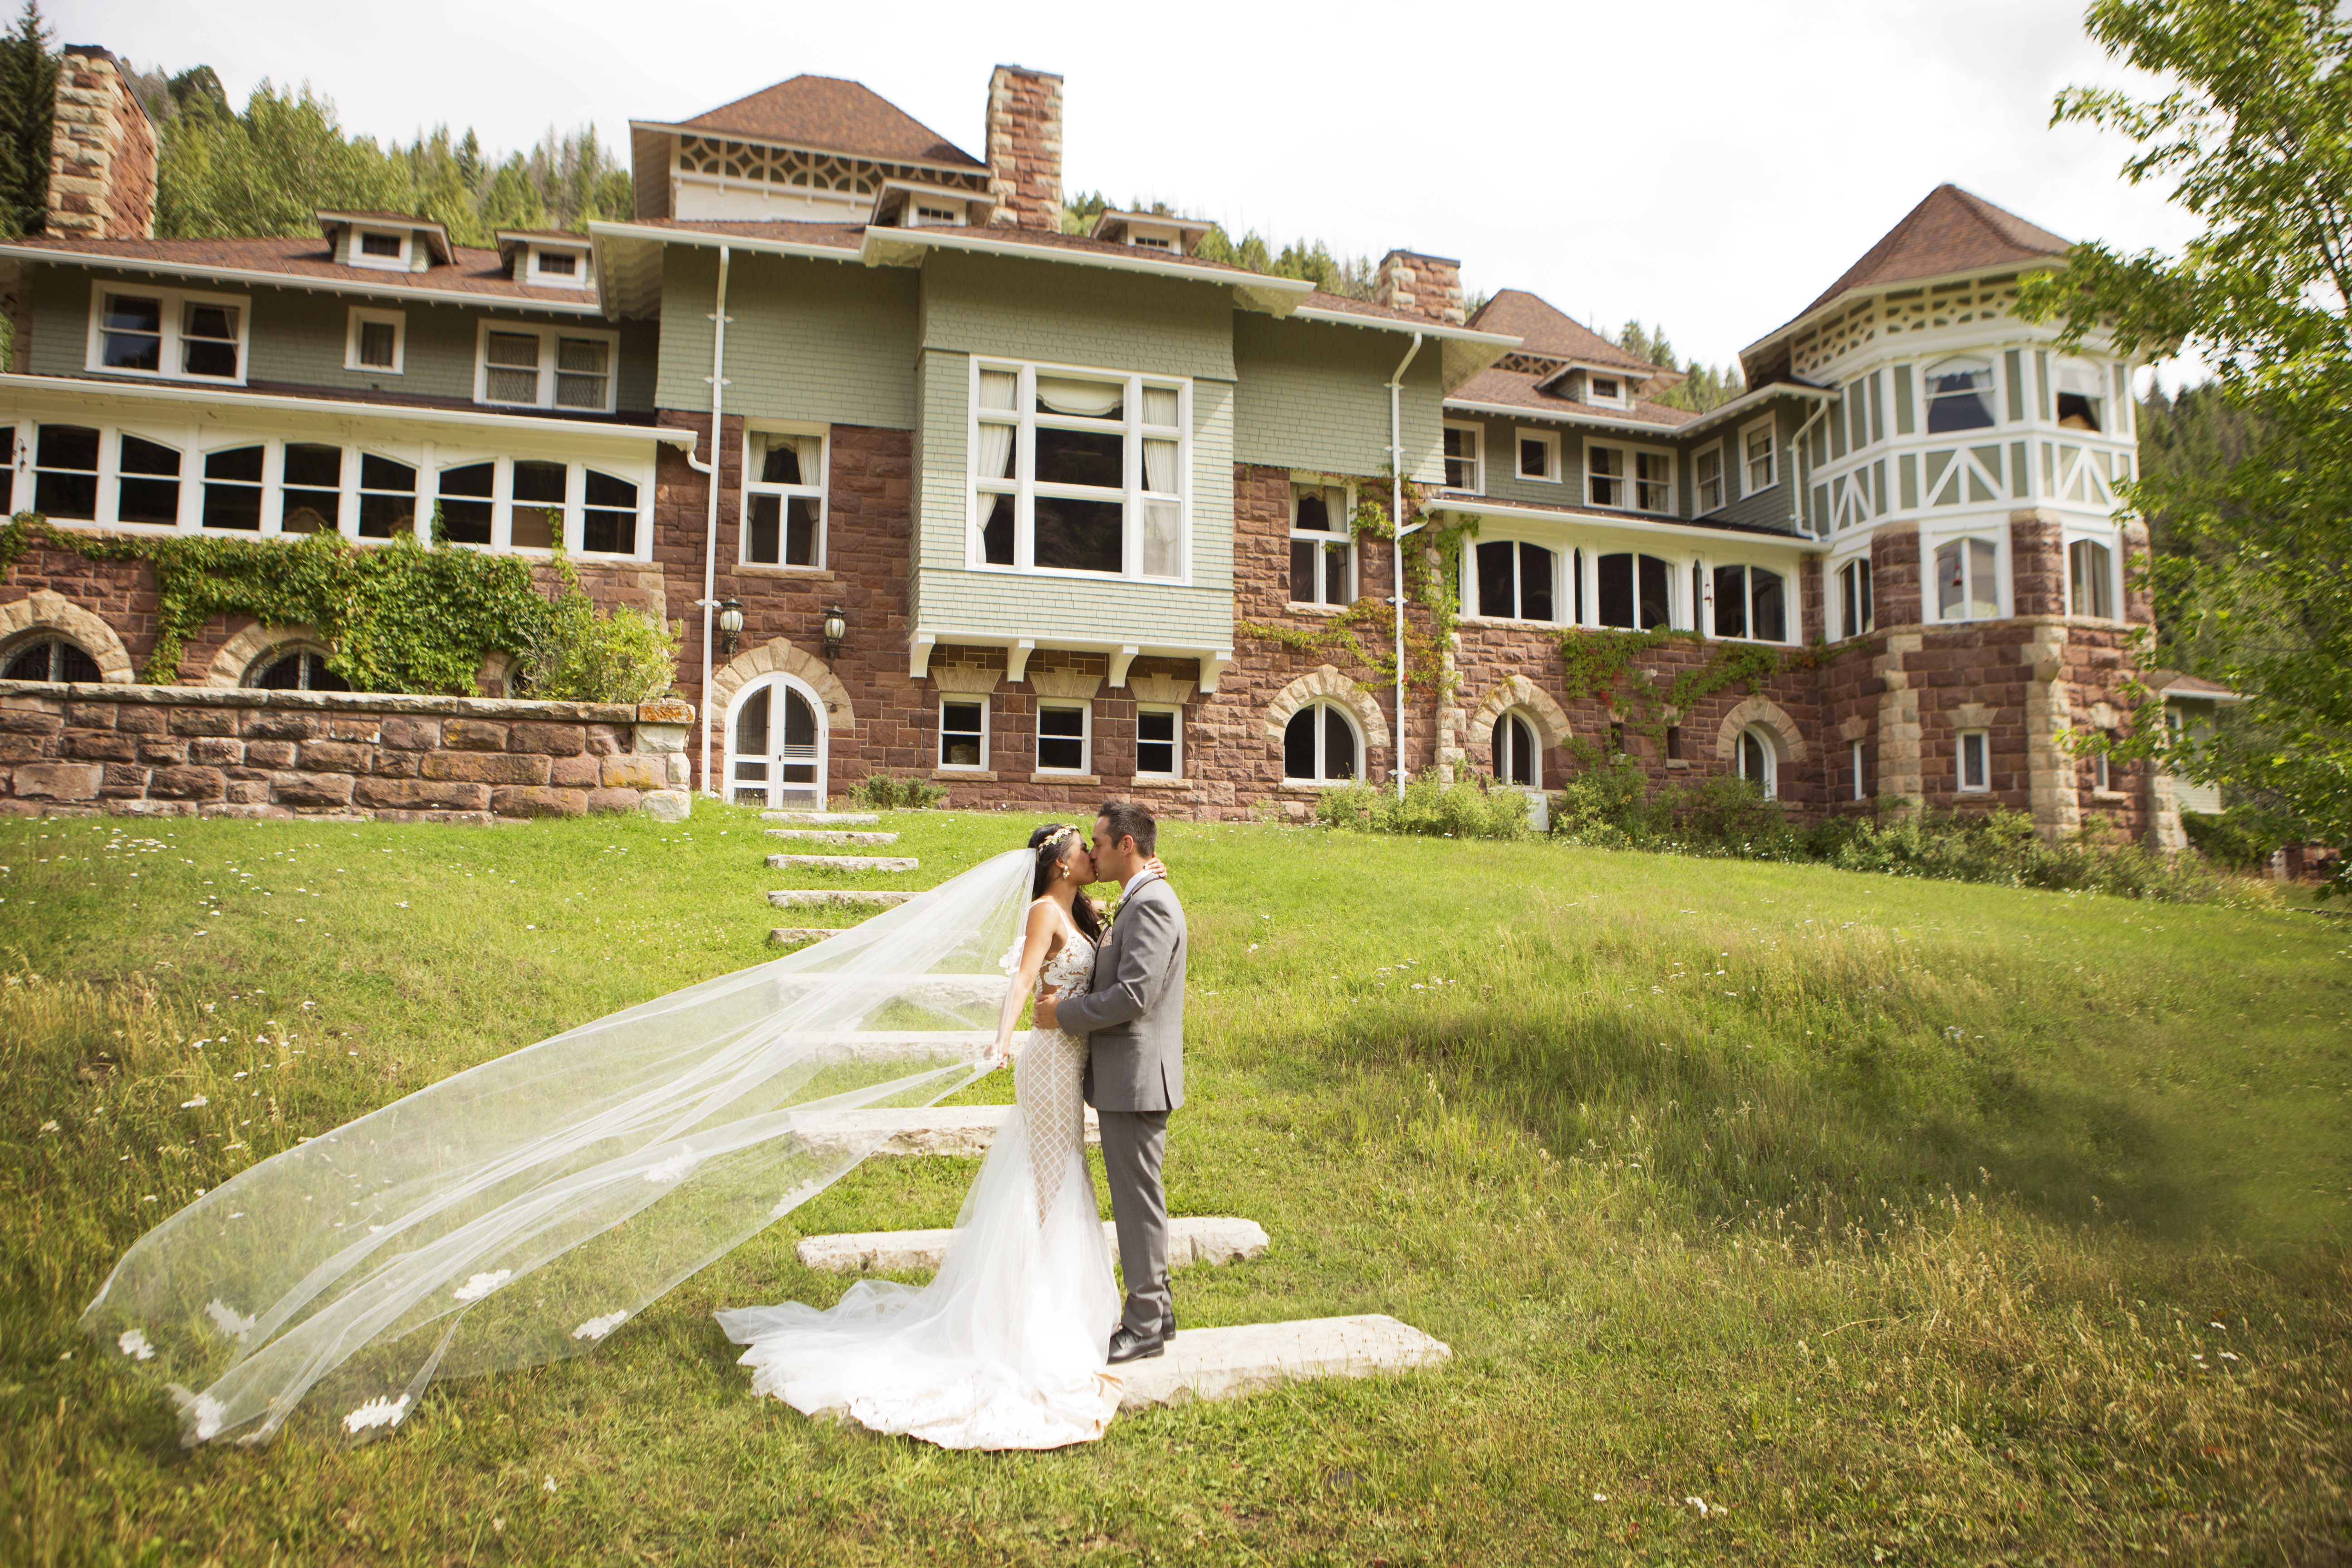 Wedding Photos at the Redstone Castle | Windfirm Photography